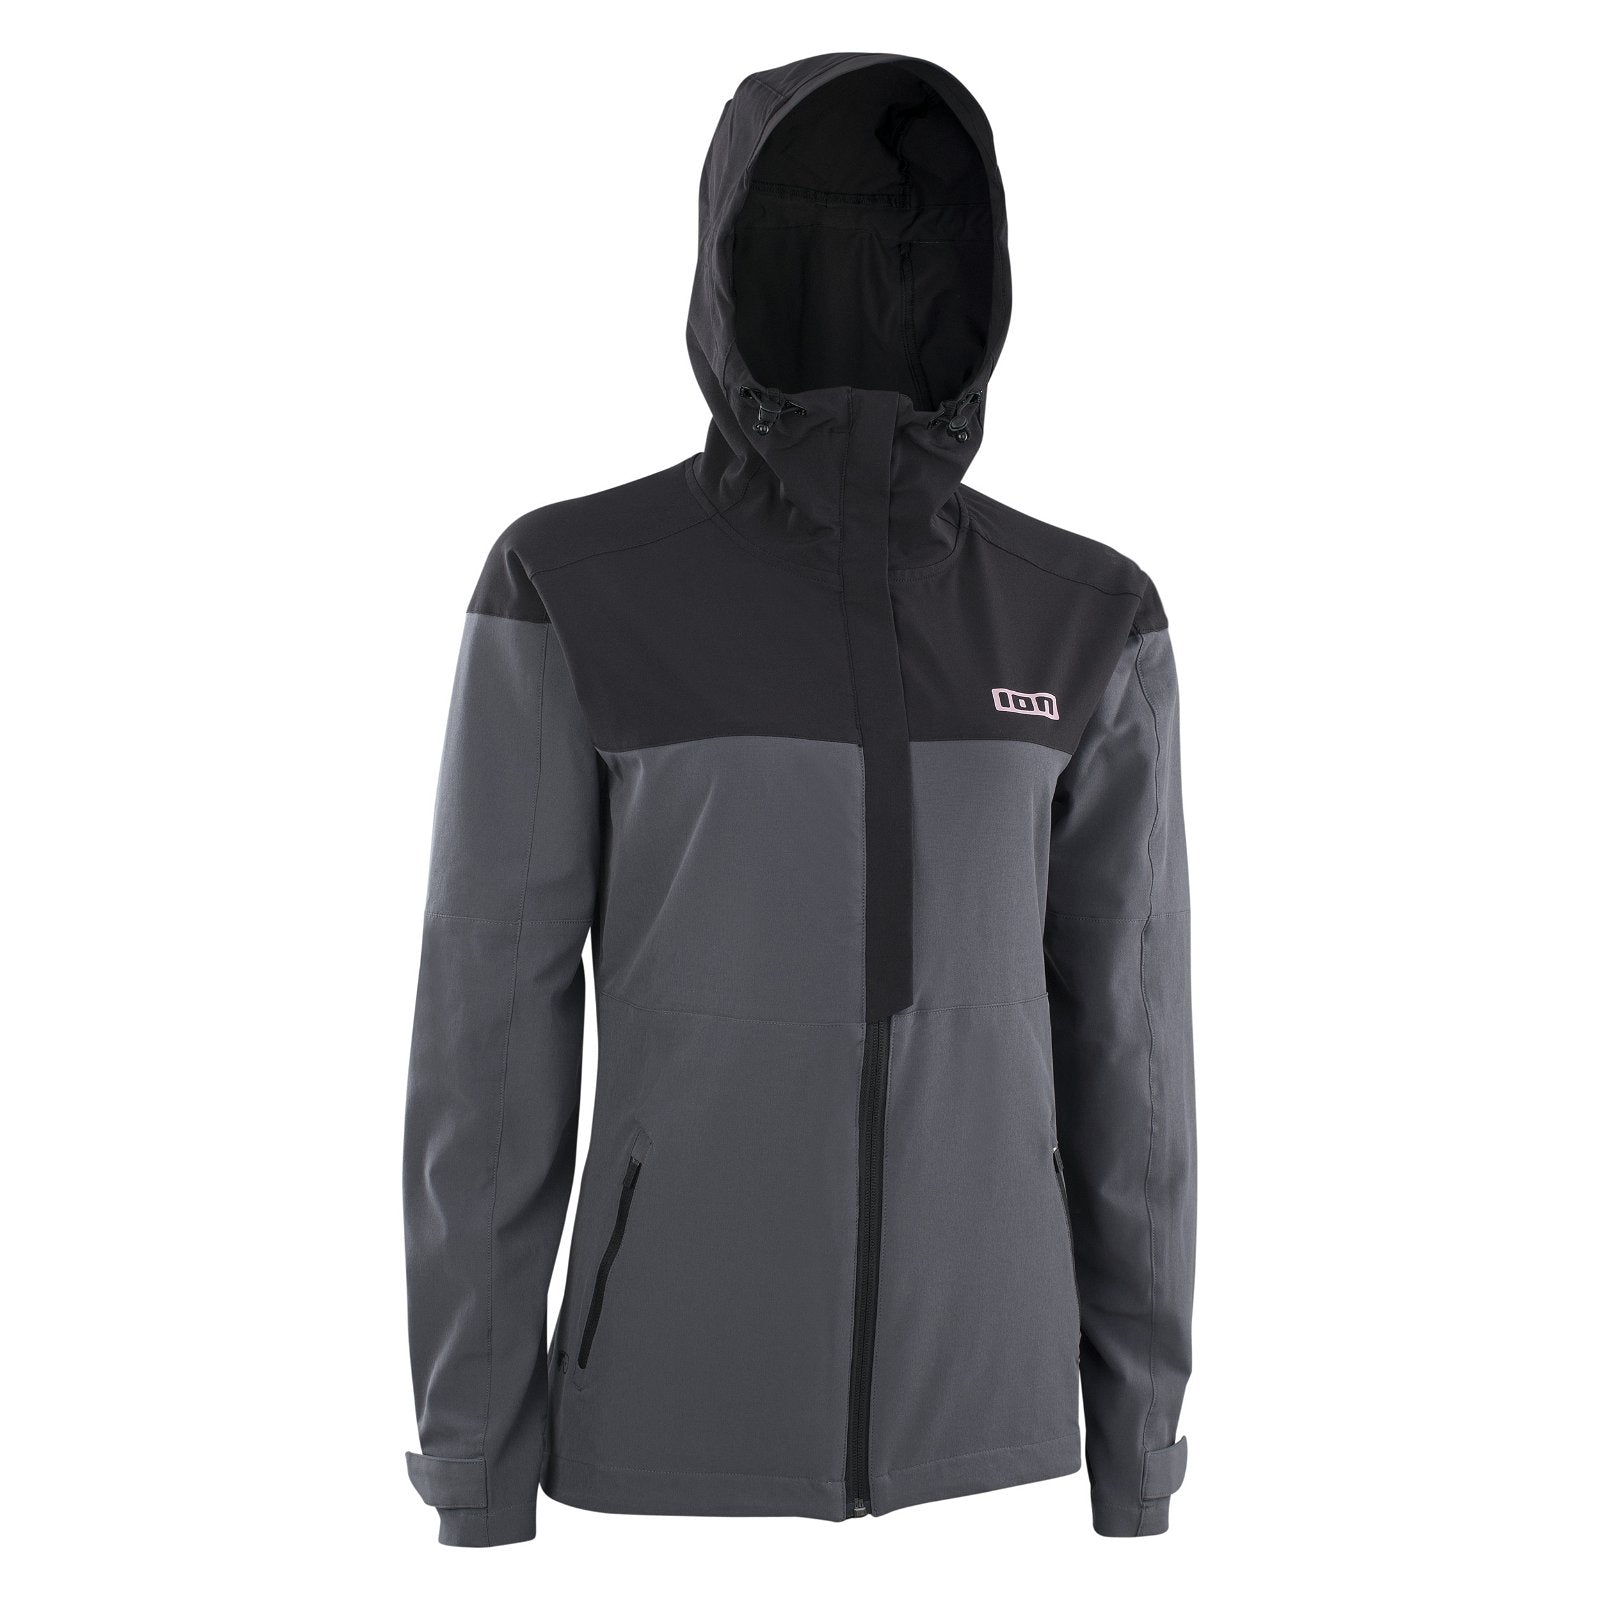 ION Outerwear Shelter Jacket 4W Softshell women 2022-ION Bike-L-Grey-47223-5491-9010583023663-Surf-store.com